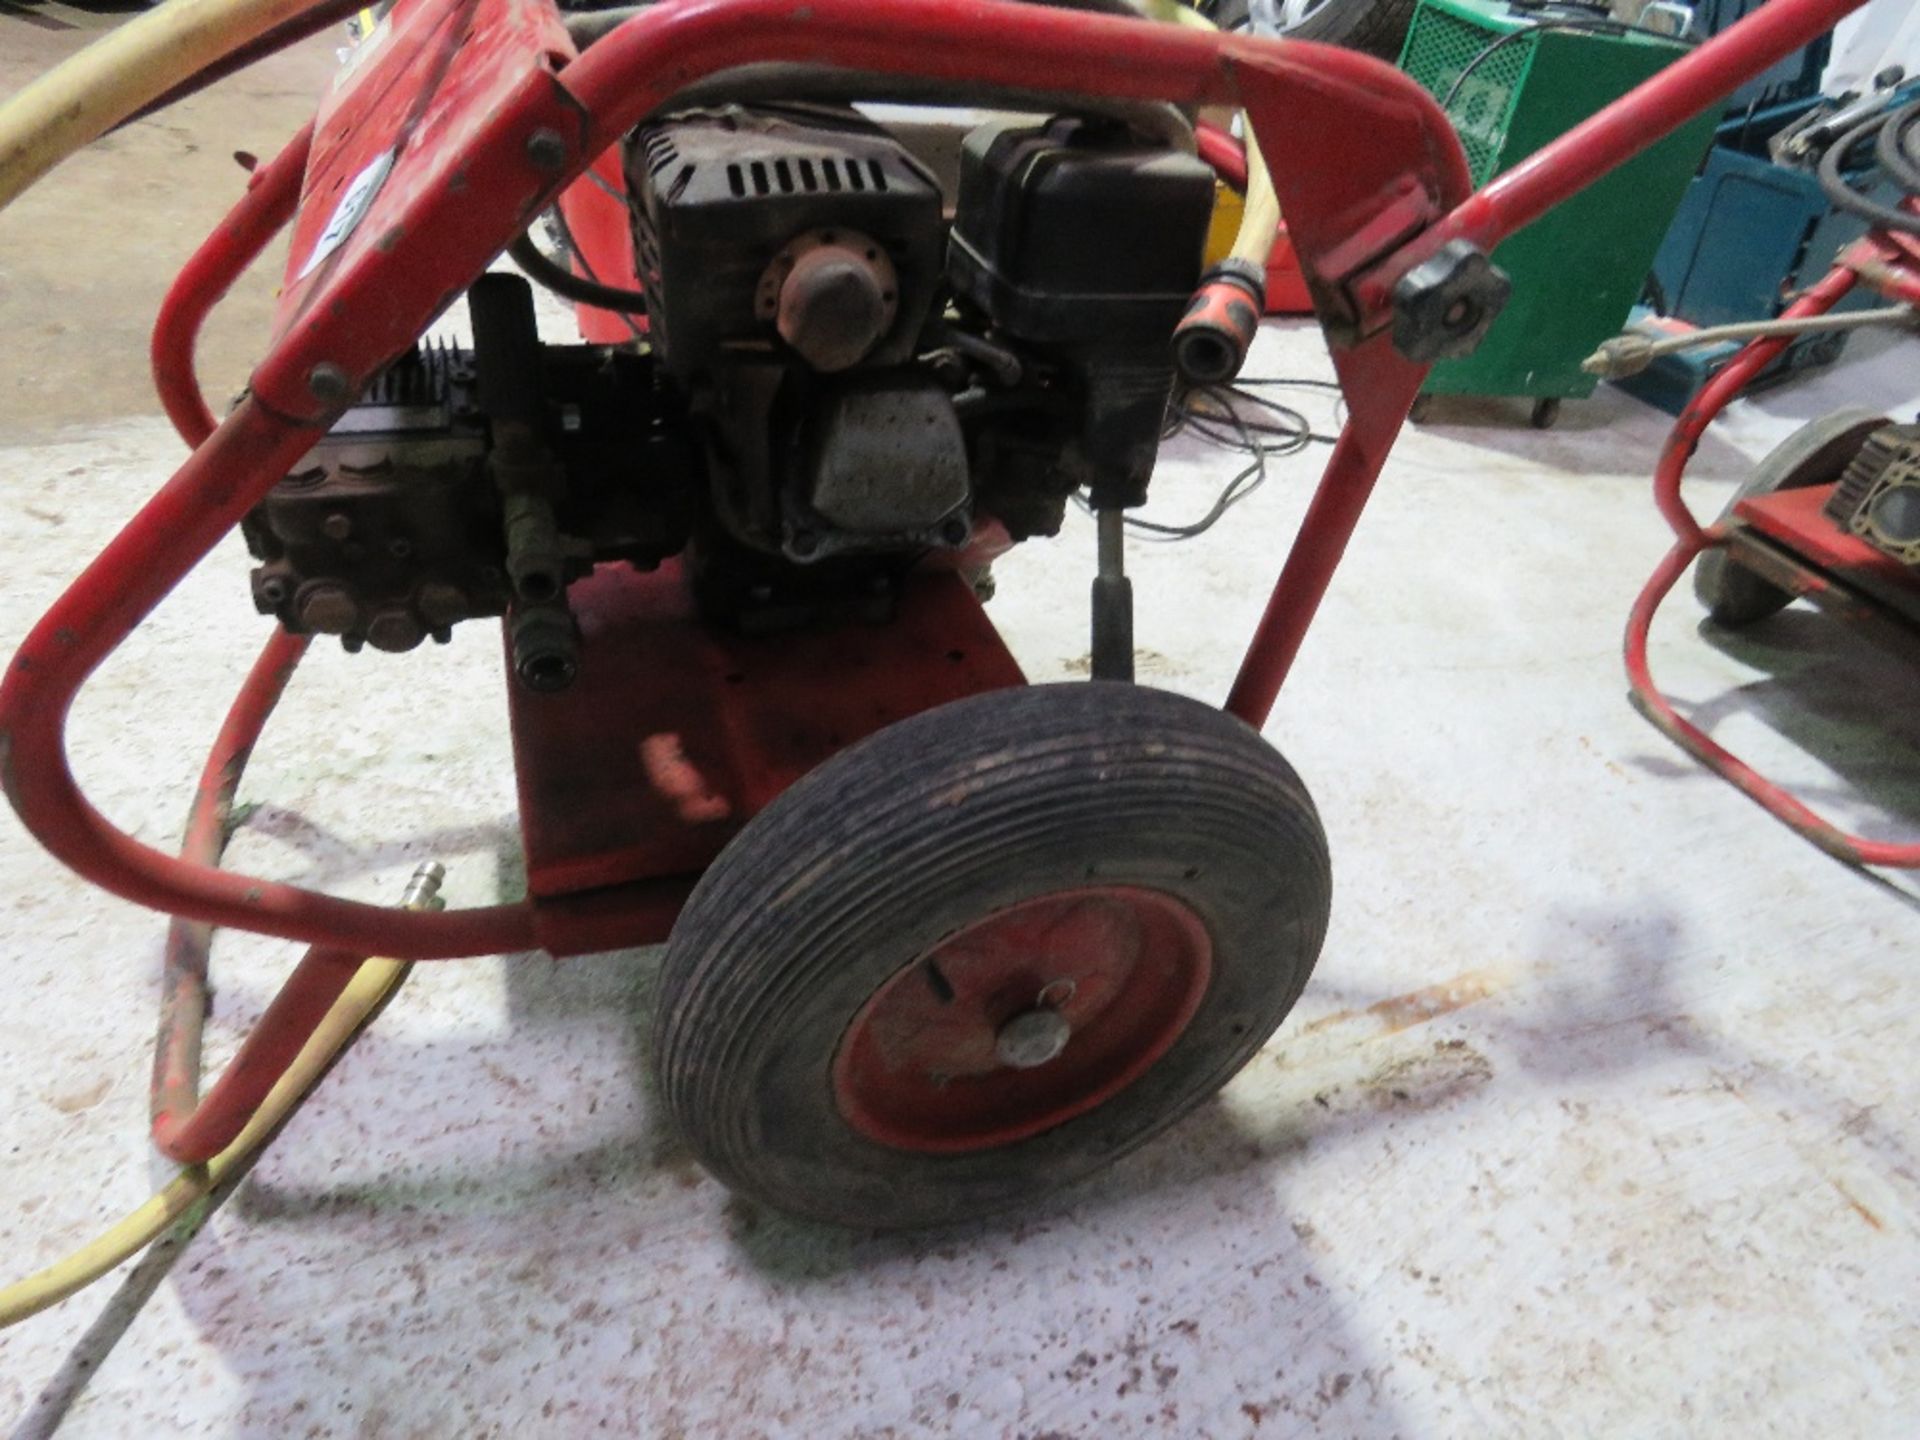 PETROL ENGINED PRESSURE WASHER WITH HOSE AND LANCE. - Image 4 of 8